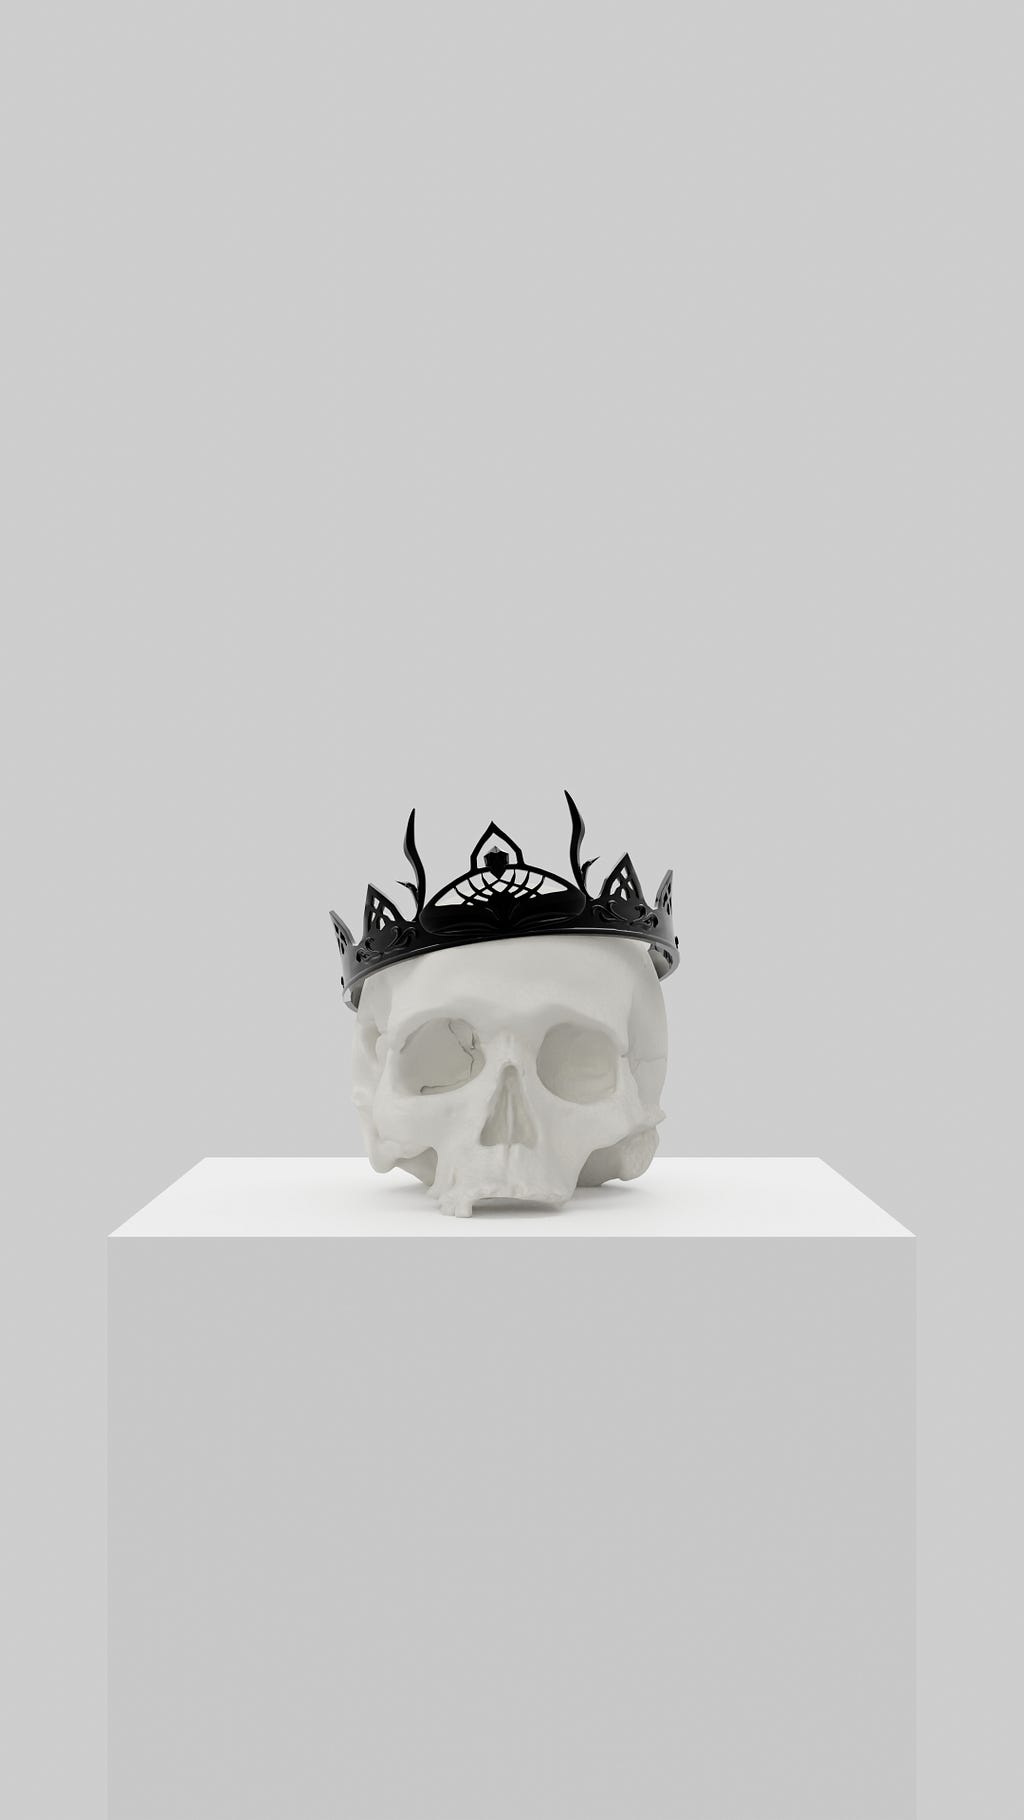 A skull resting on a white pedestal wearing a black crown against a white background